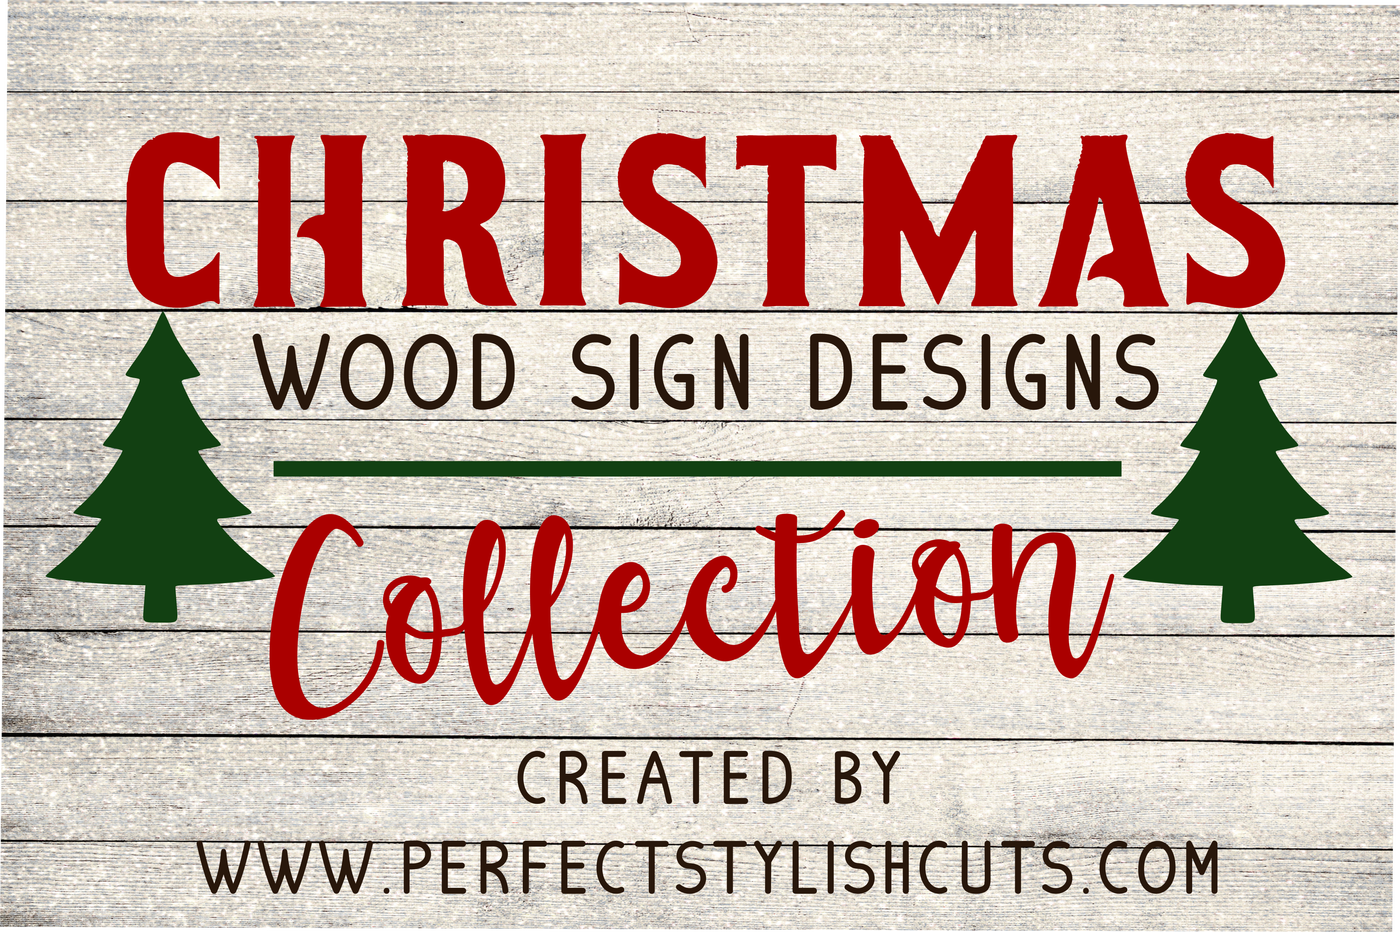 Sale Christmas Wood Sign Designs Collection Svg Eps Dxf Png Files For Cutting Machines By Perfectstylishcuts Thehungryjpeg Com